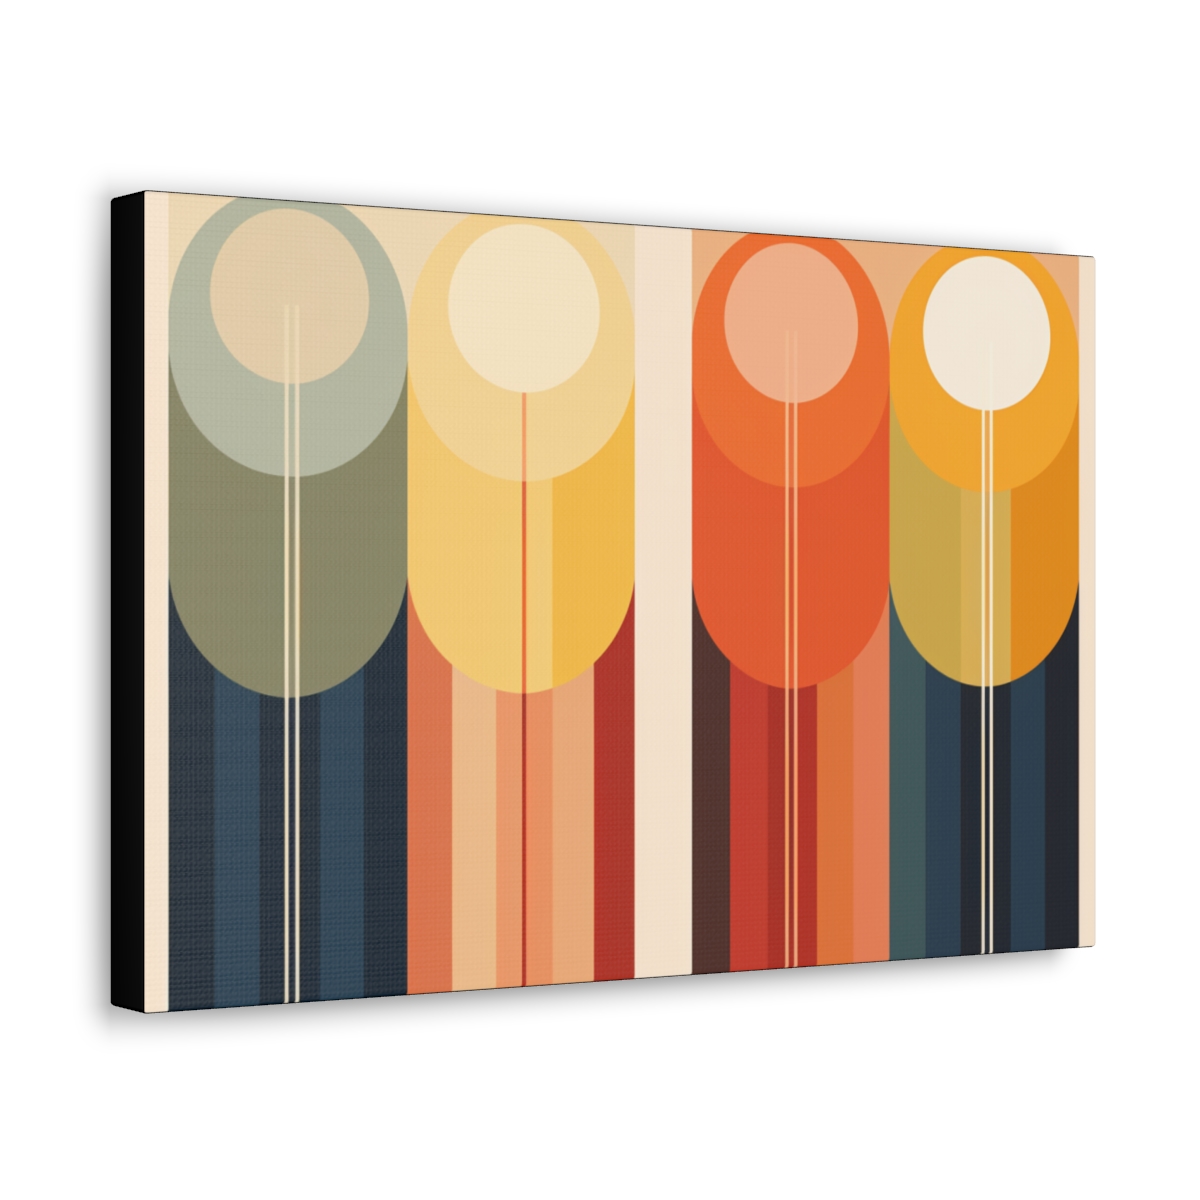 Abstract Geometric Art Canvas Print: A Slice of Reality